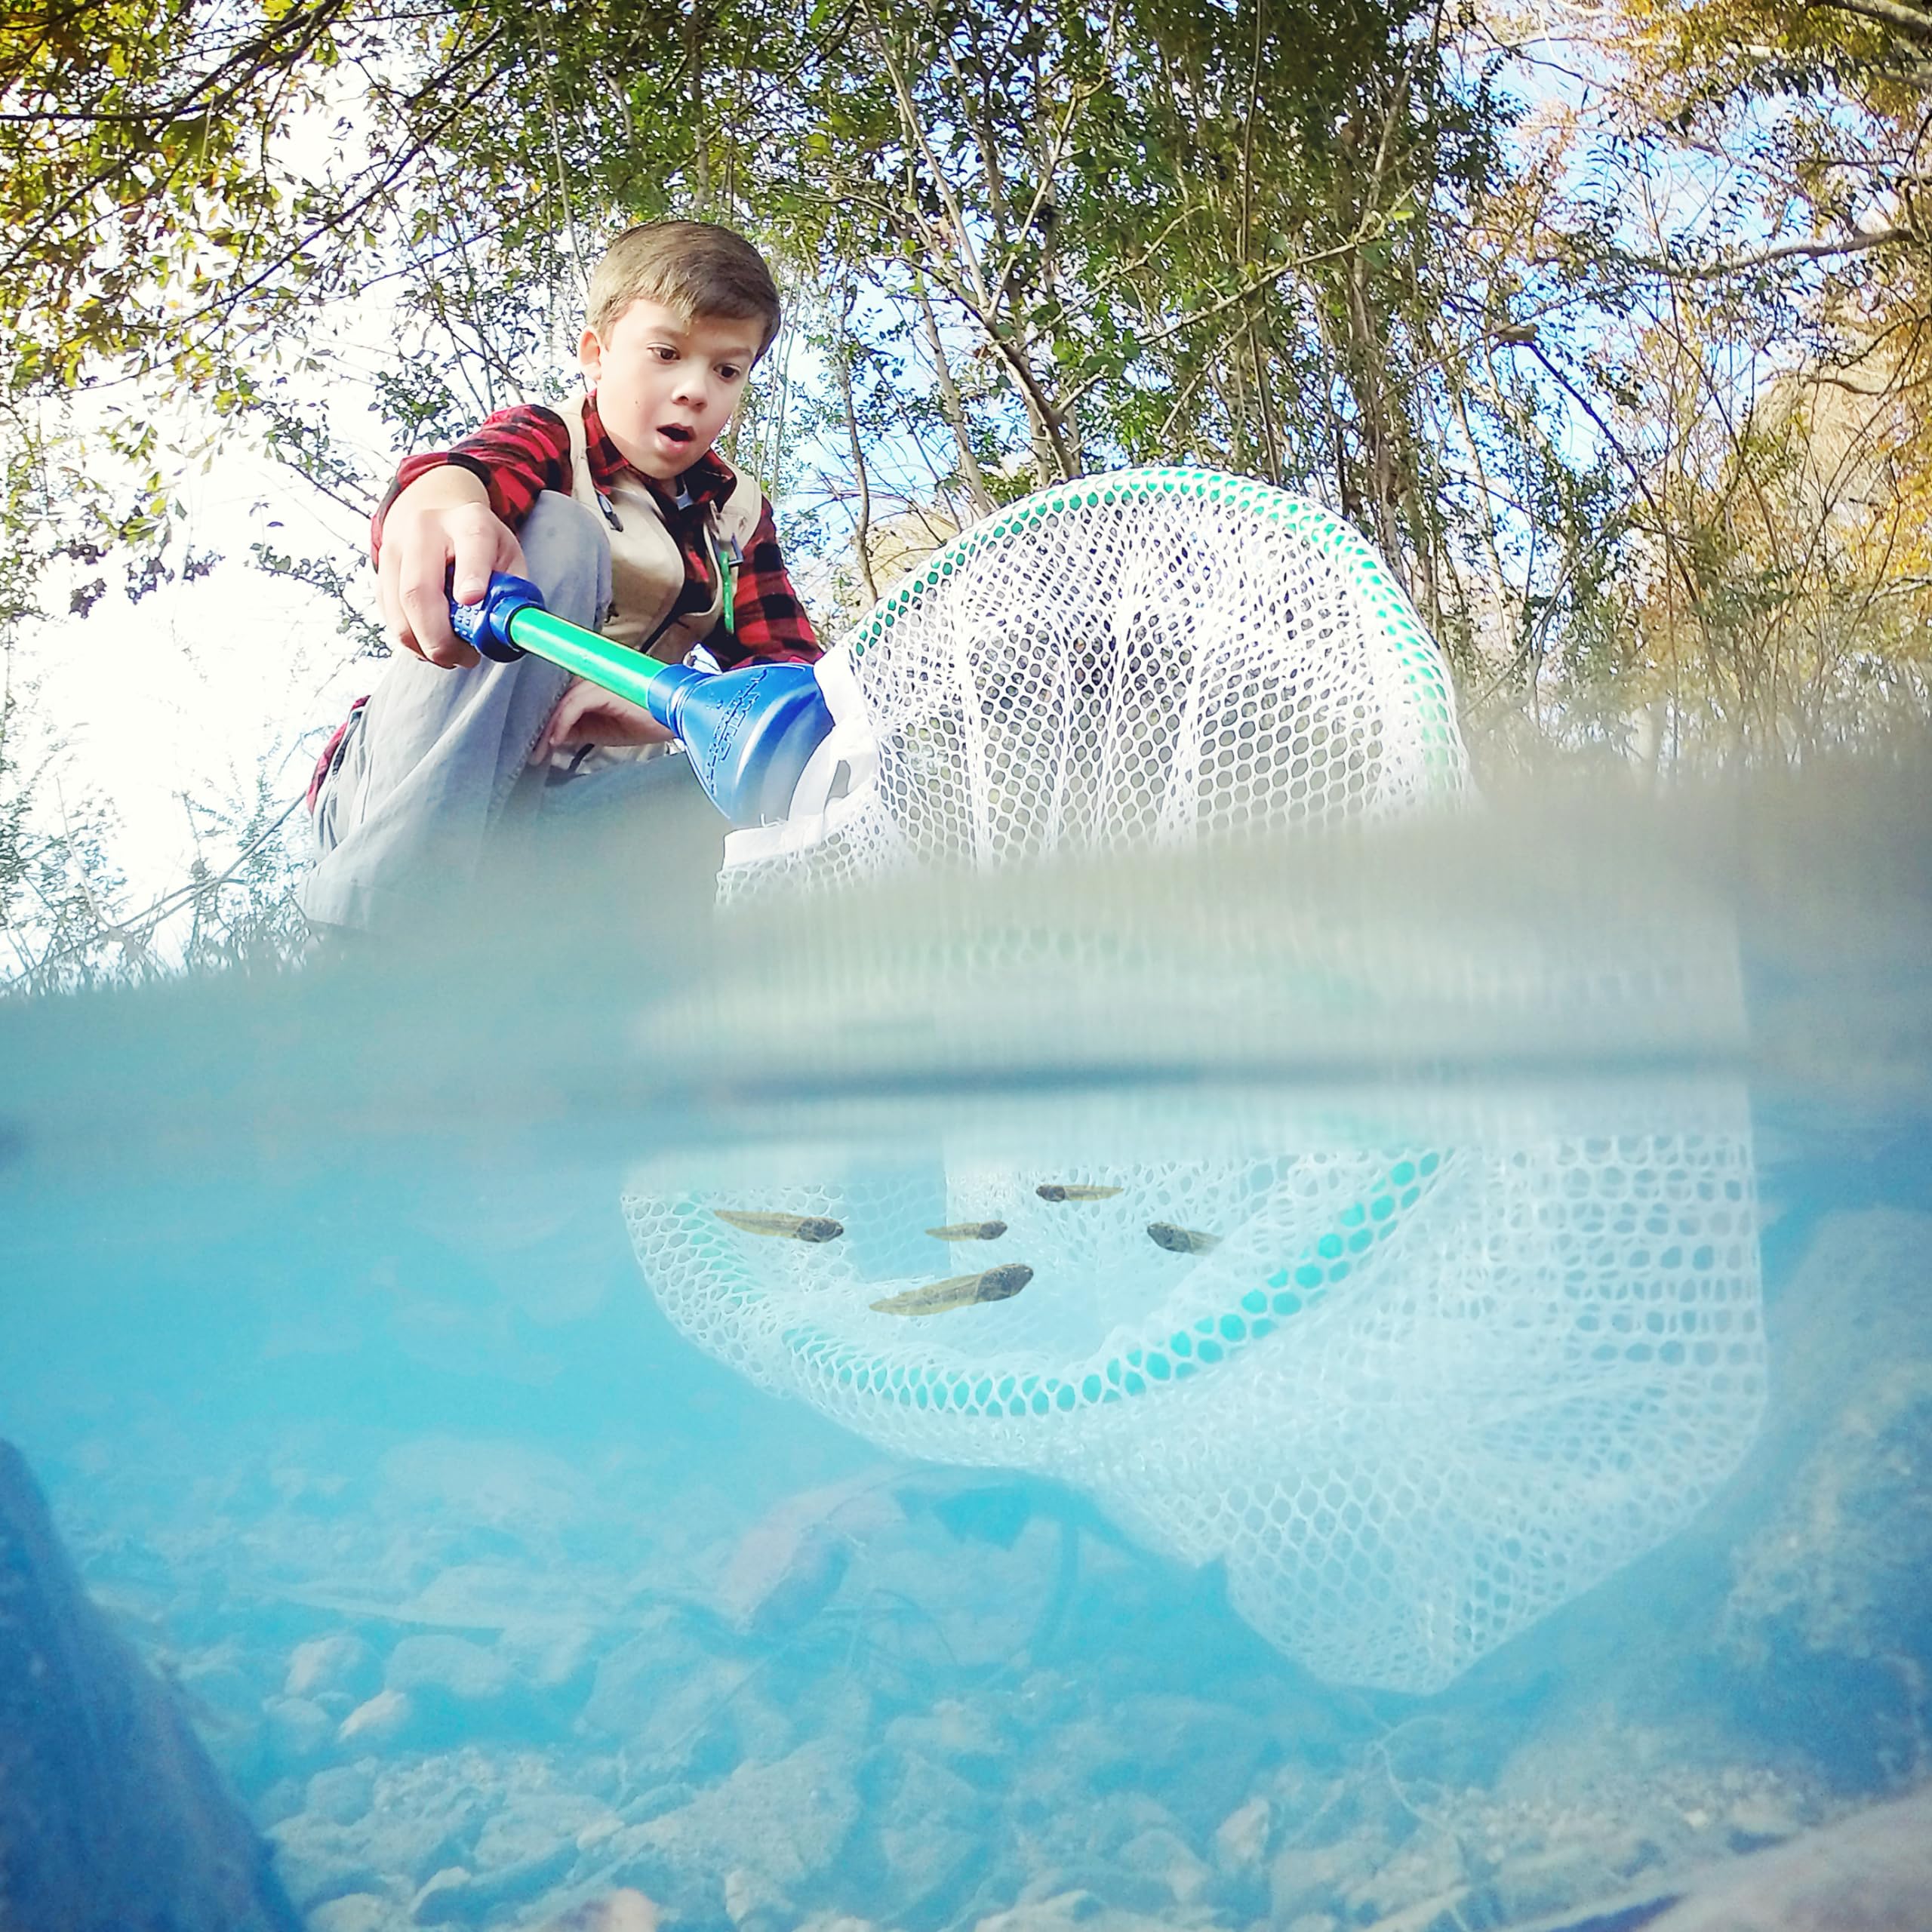 Wild Adventure Children's Capture Net, Outdoor Nature Play Butterflies, Insects, Fish, Durable Beach Toy